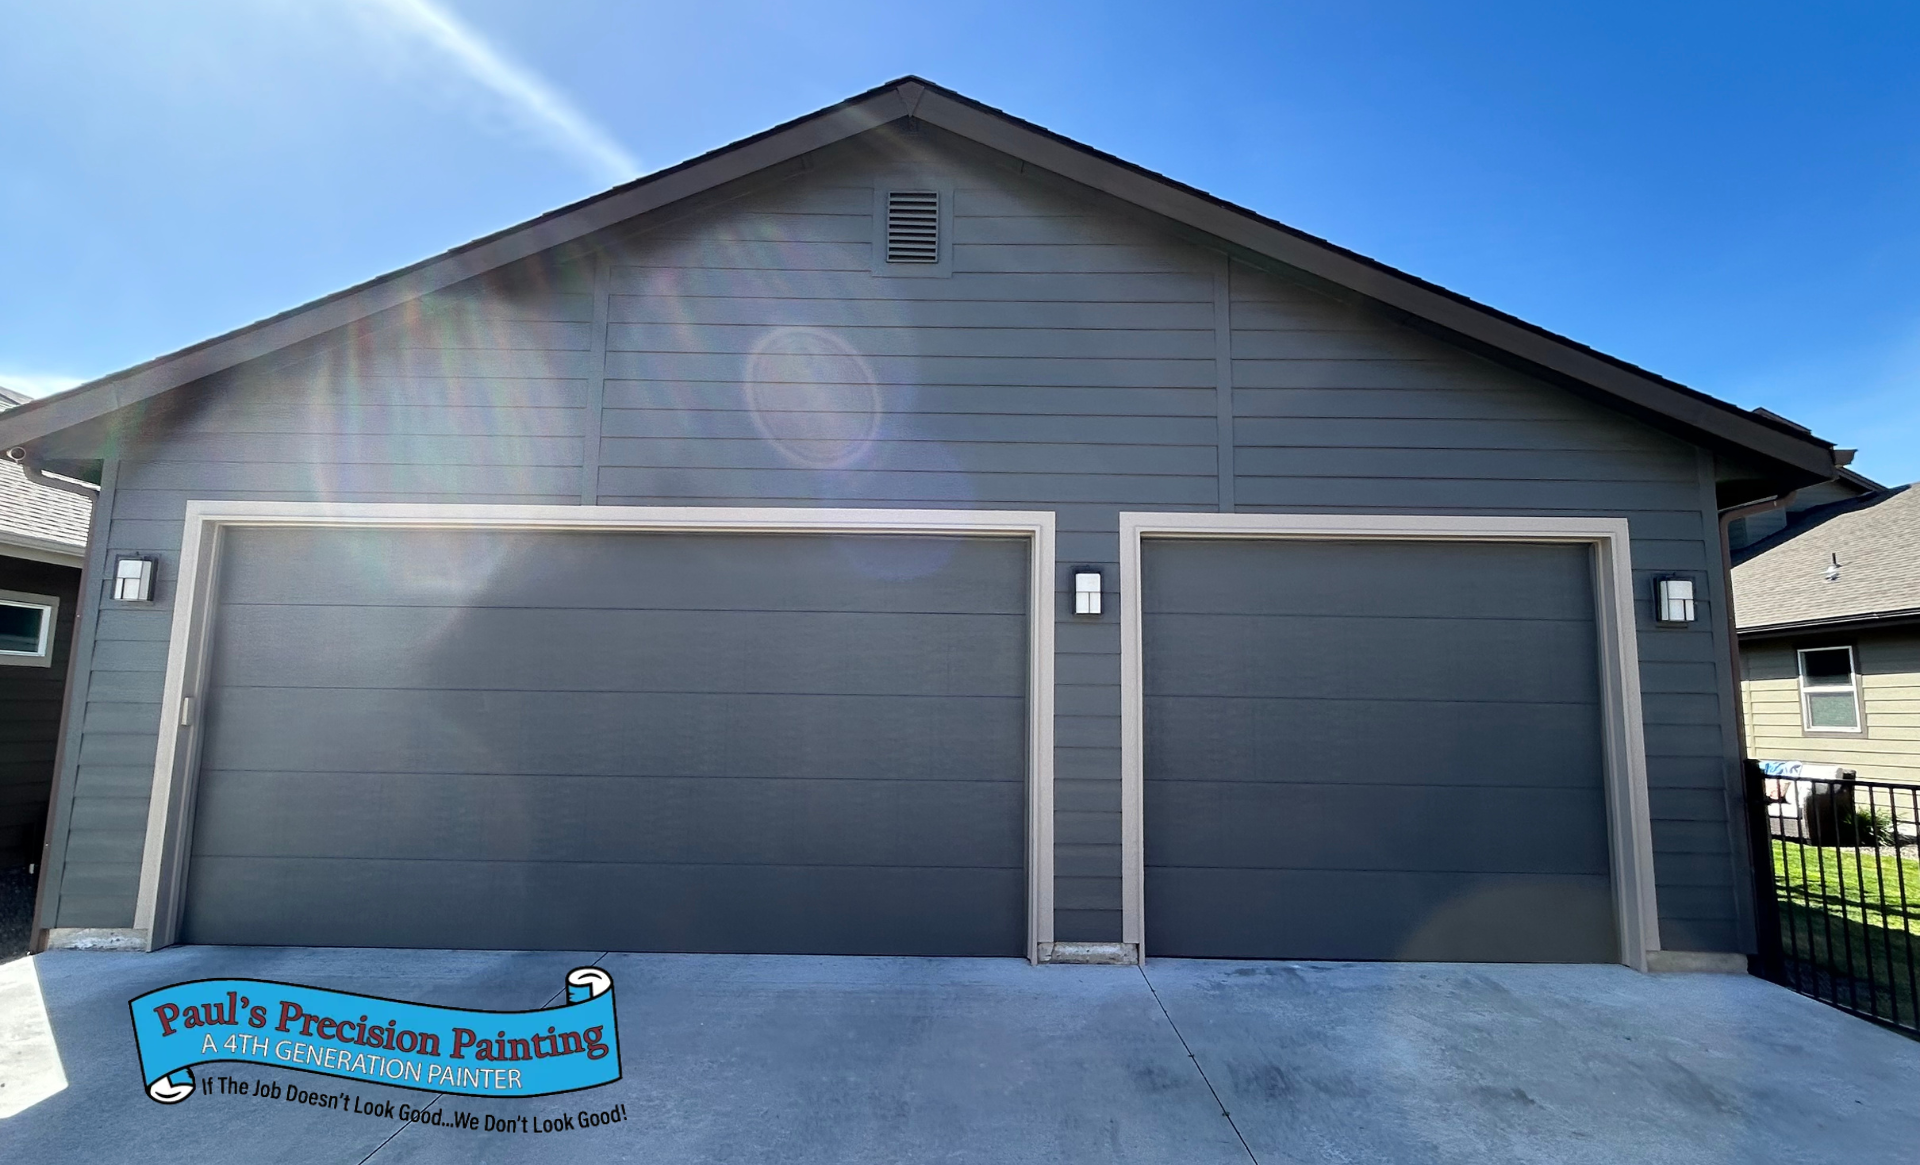 Exterior House Painting in Boise Idaho - Paul's Precision Painting